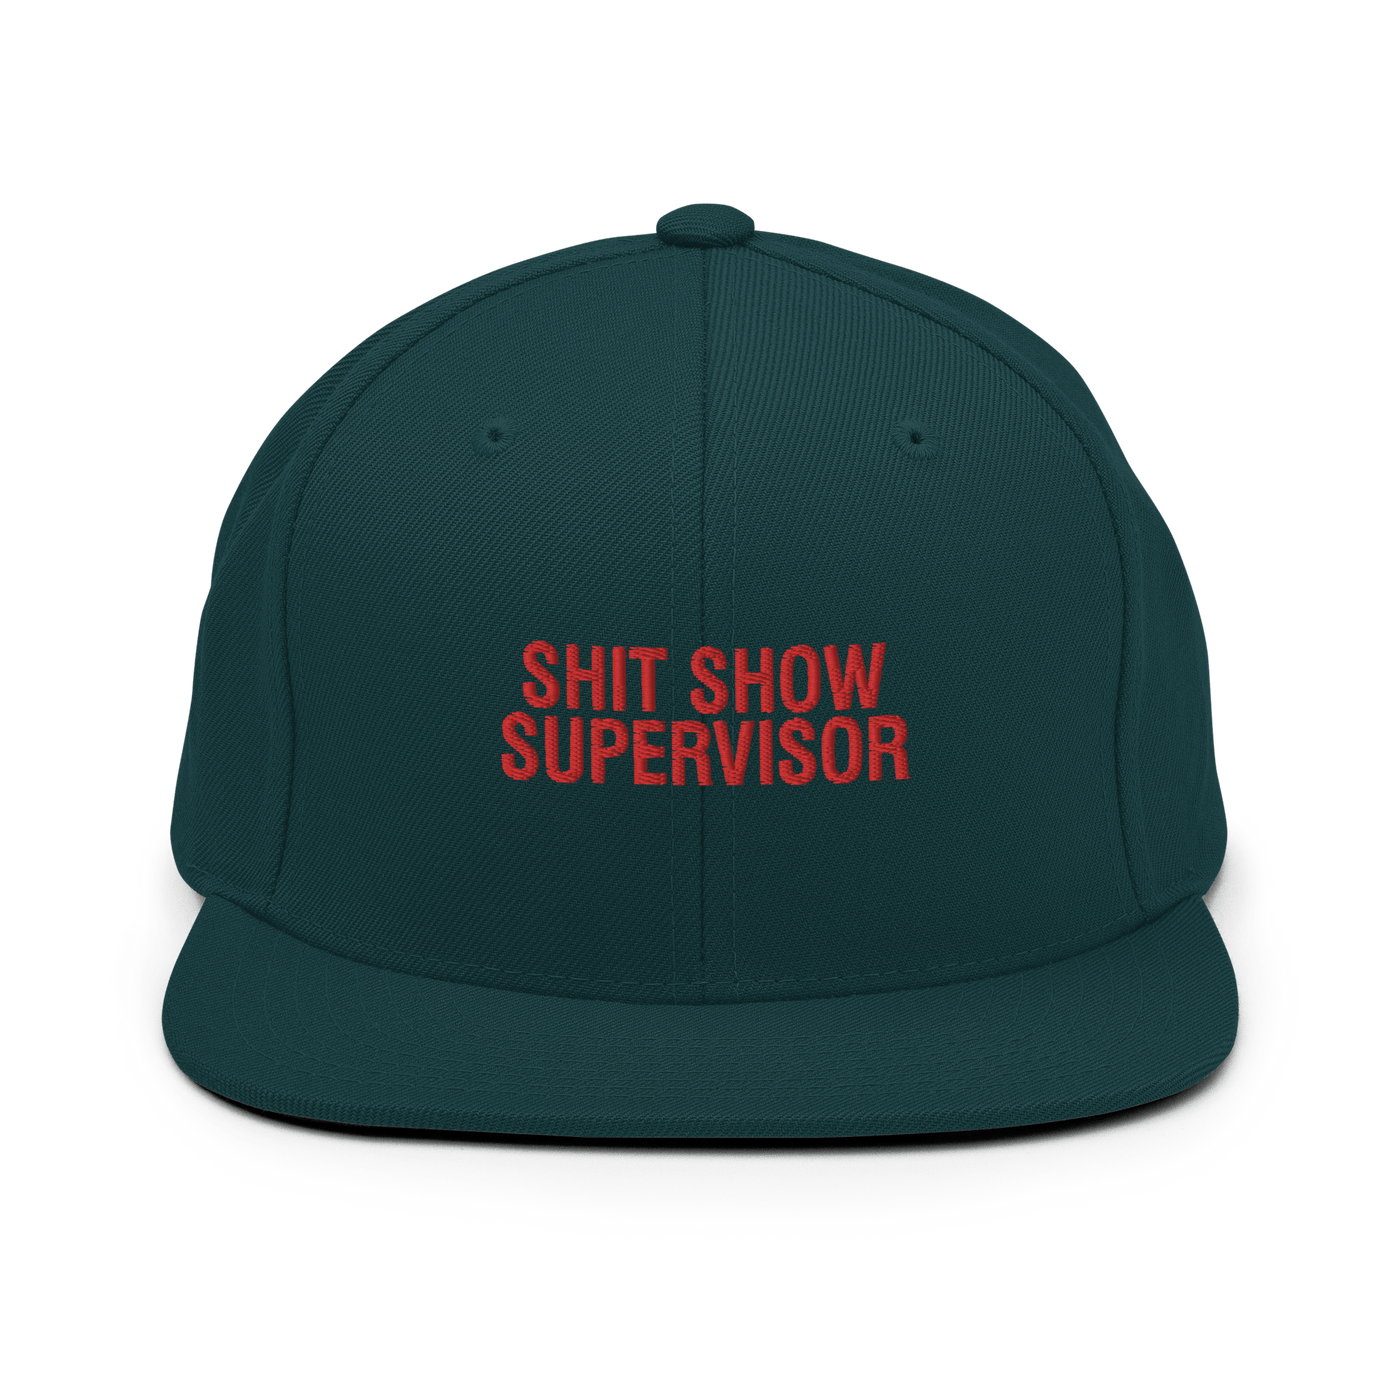 Shit Show Supervisor Snapback - Spruce - Just Another Cap Store